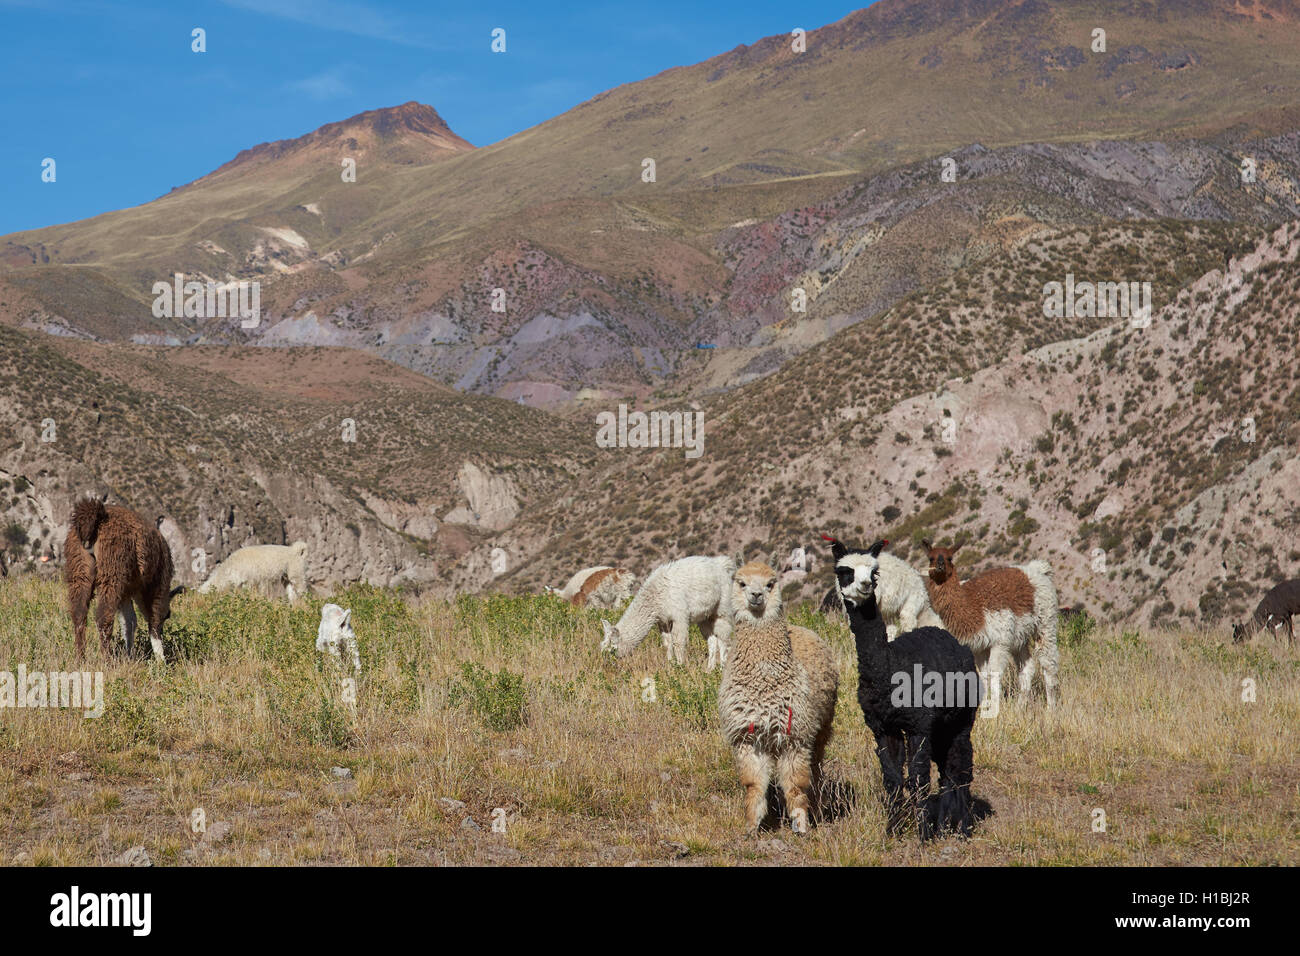 Alpaca (Vicugna pacos) grazing in a field in the small town of Putre Stock Photo